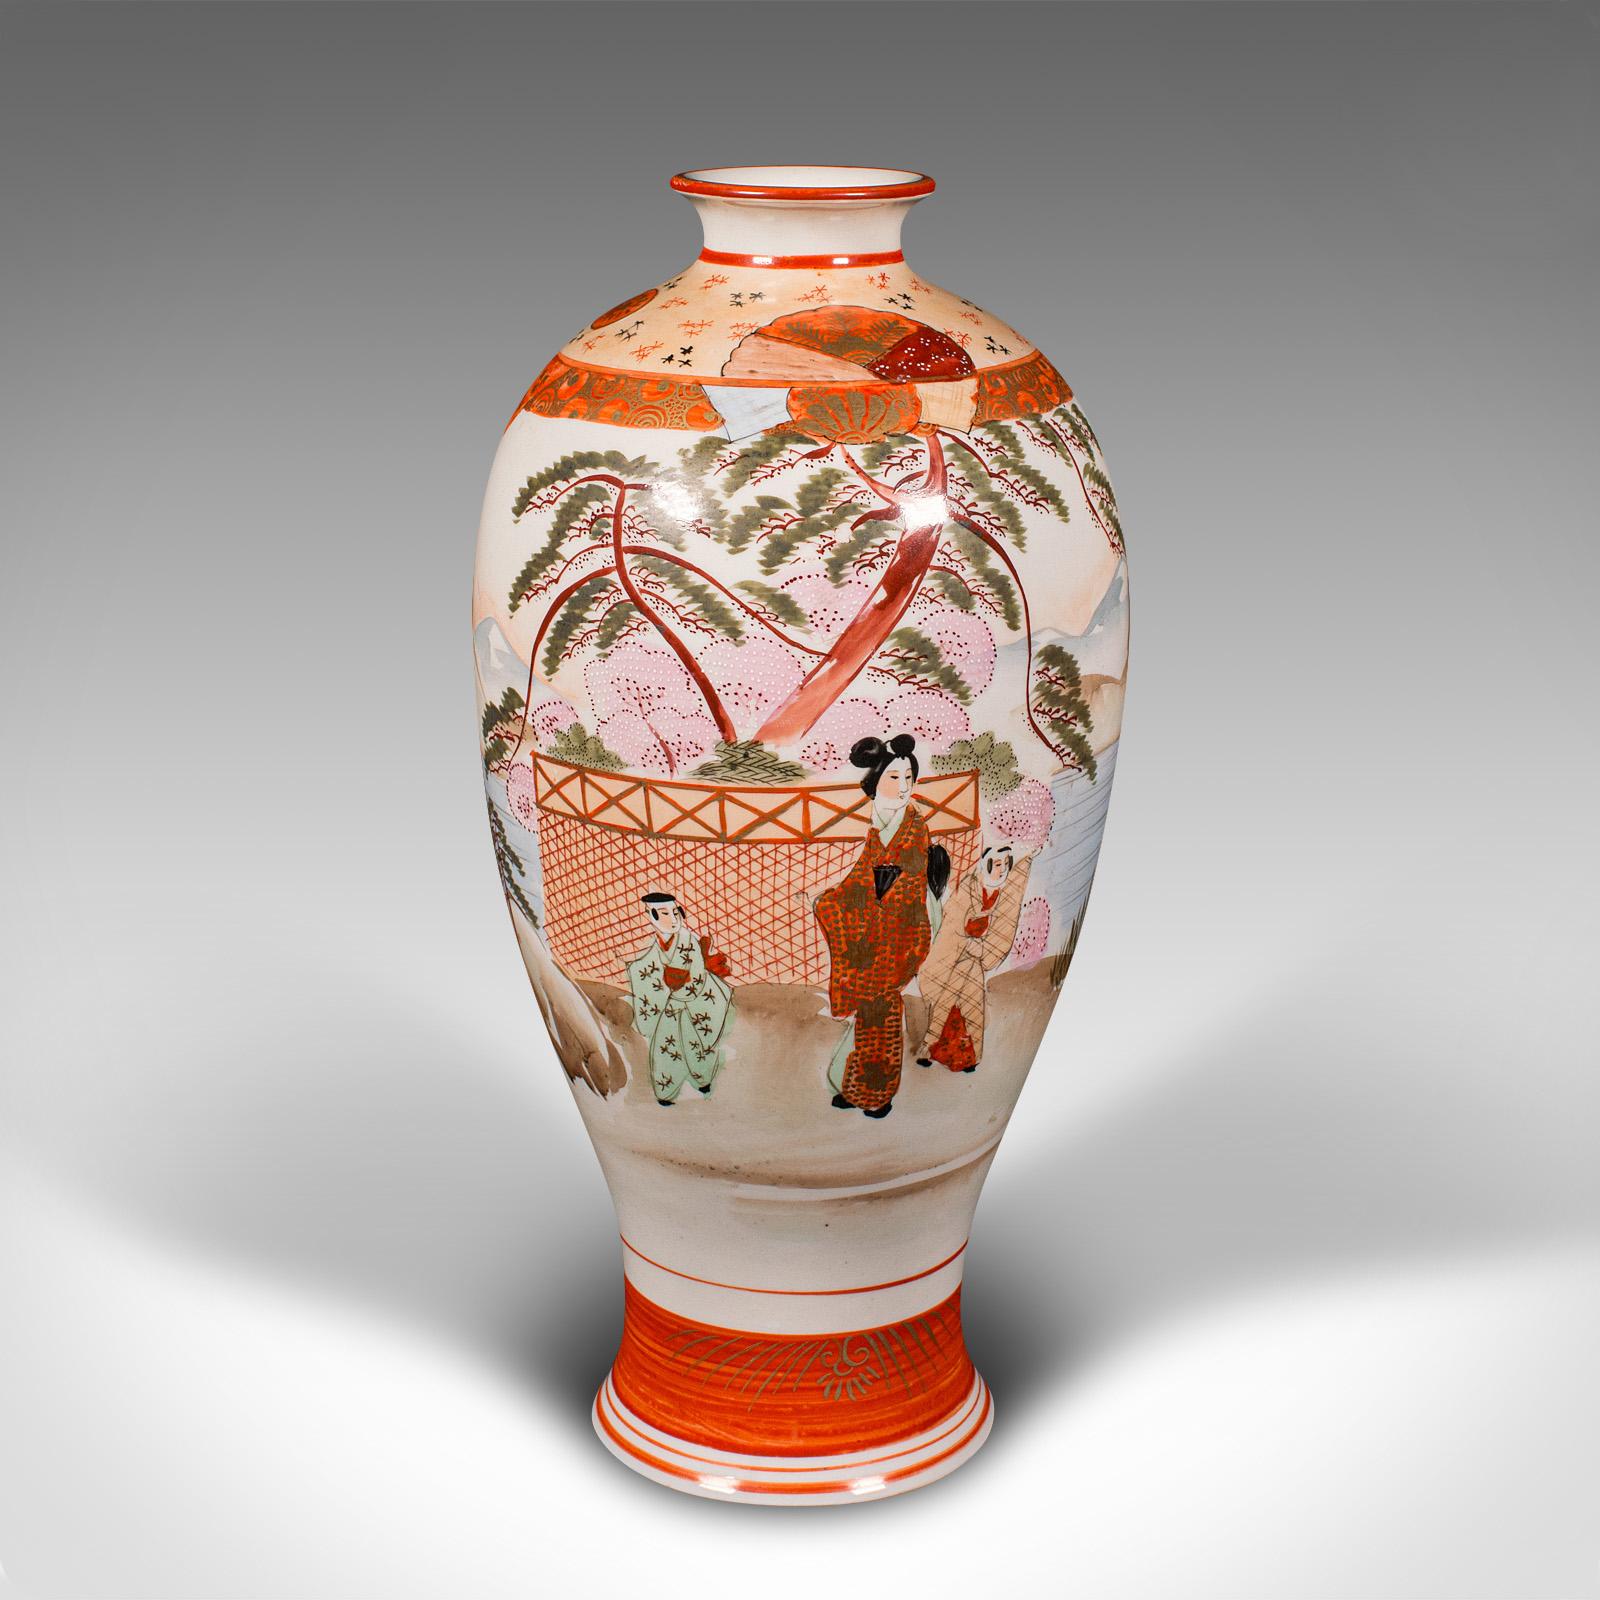 This is a vintage Kutani vase. A Japanese, ceramic baluster flower urn, dating to the Art Deco period, circa 1930.

Eye-catching example of traditional Kutani ware - Japanese for 'Nine Valleys'
Displays a desirable aged patina and in good original